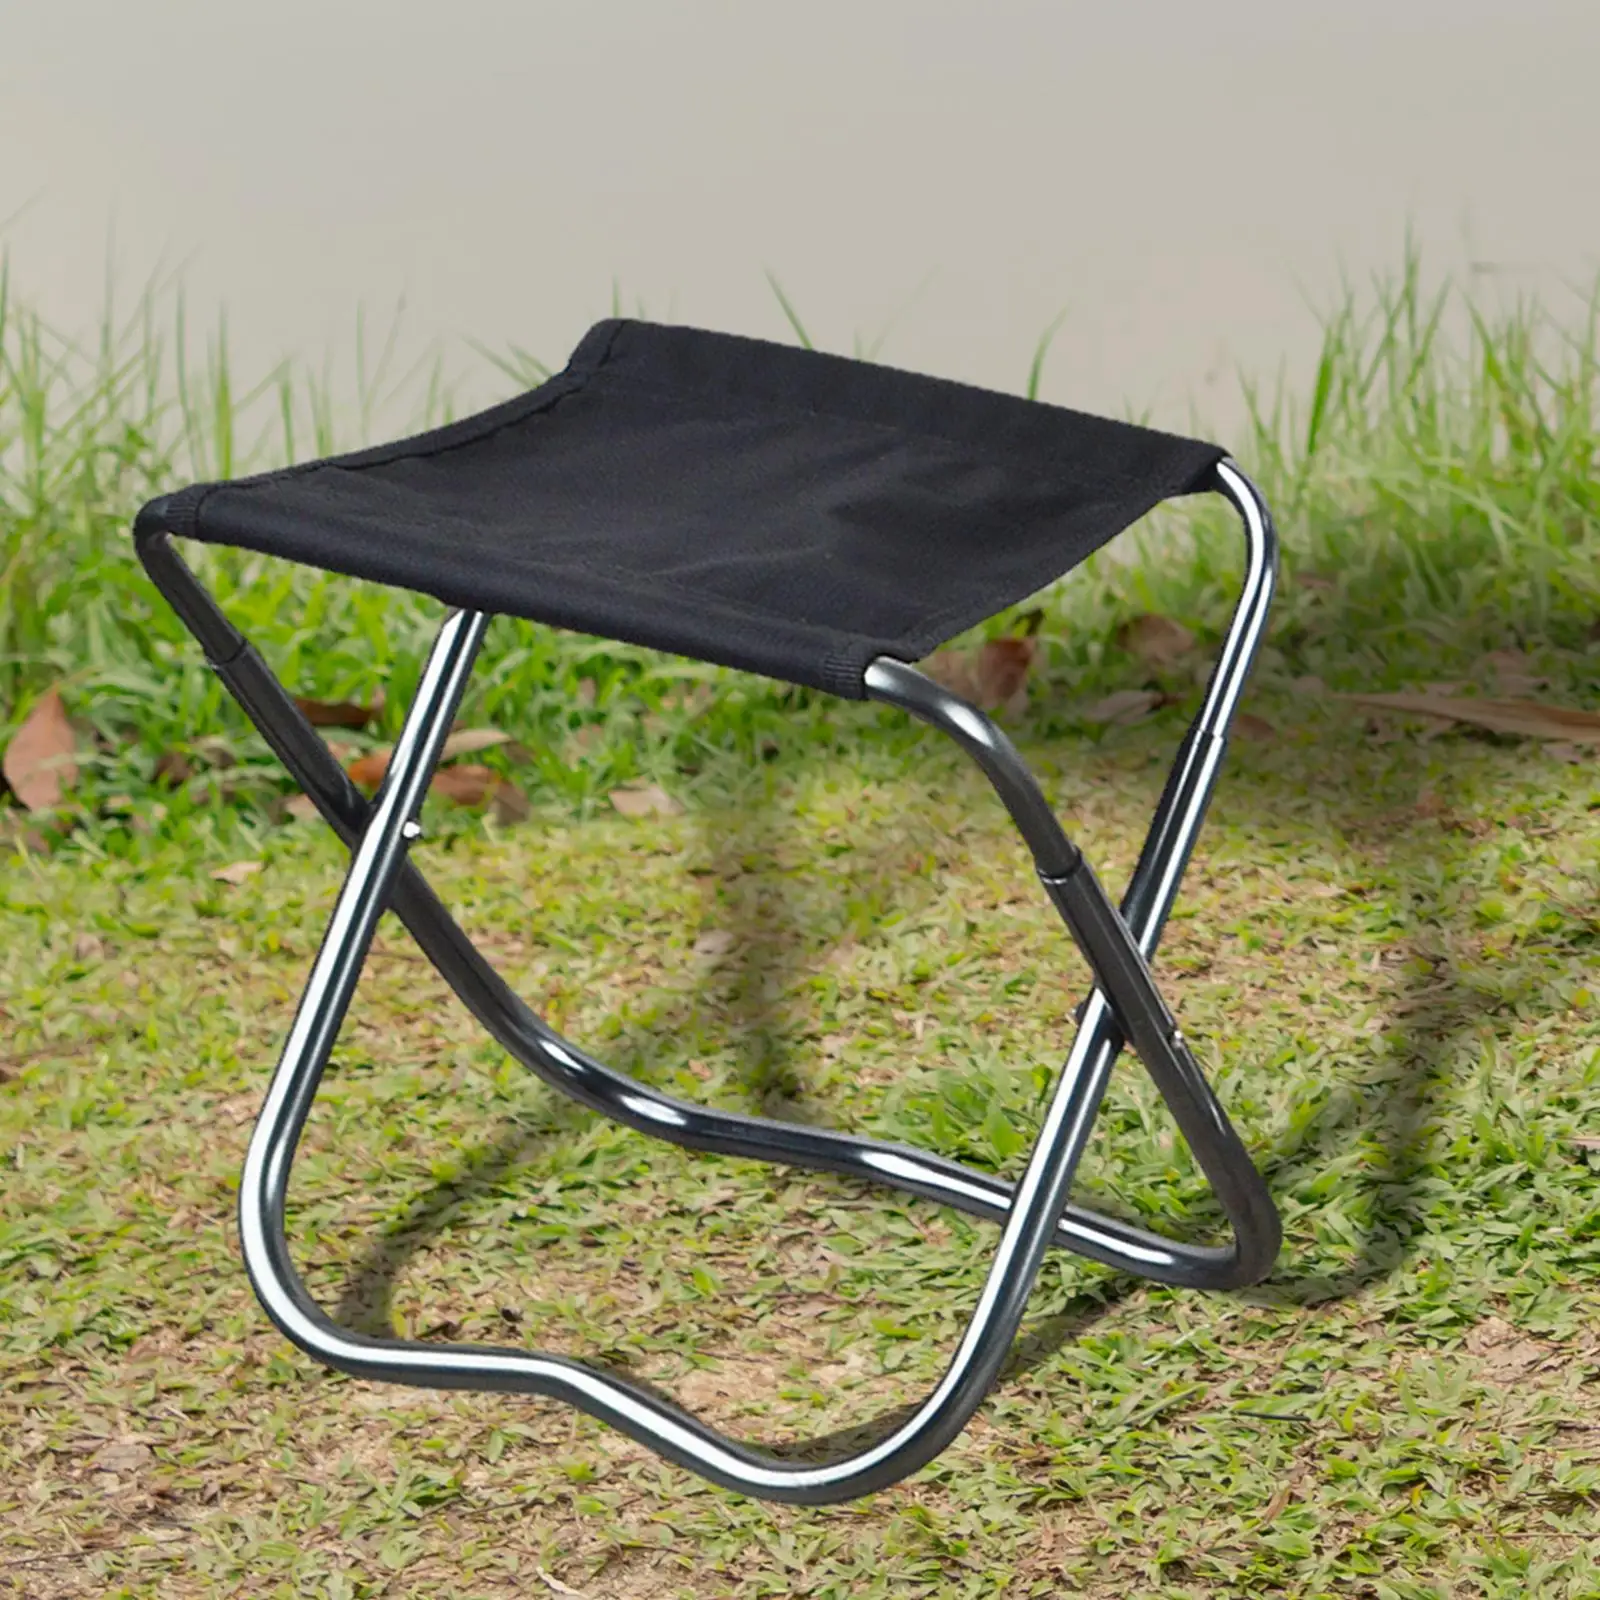 Camping Chair Portable Foldable Reusable Outdoor Activity Multipurpose Durable Fishing Seat for Hiking Garden Fishing BBQ Lawn